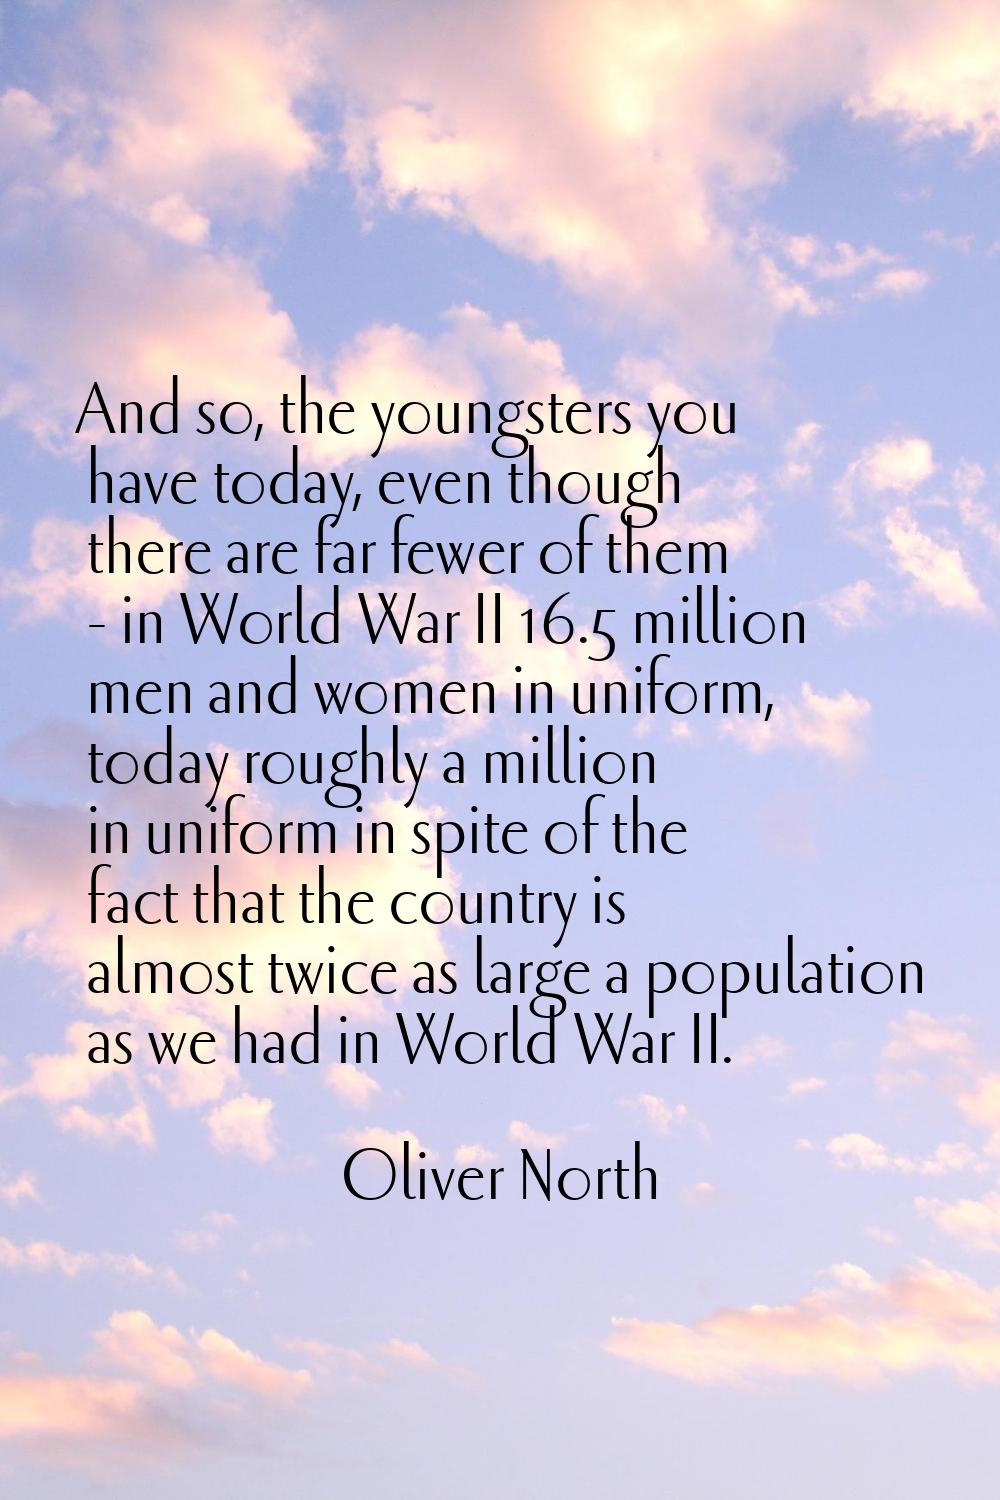 And so, the youngsters you have today, even though there are far fewer of them - in World War II 16